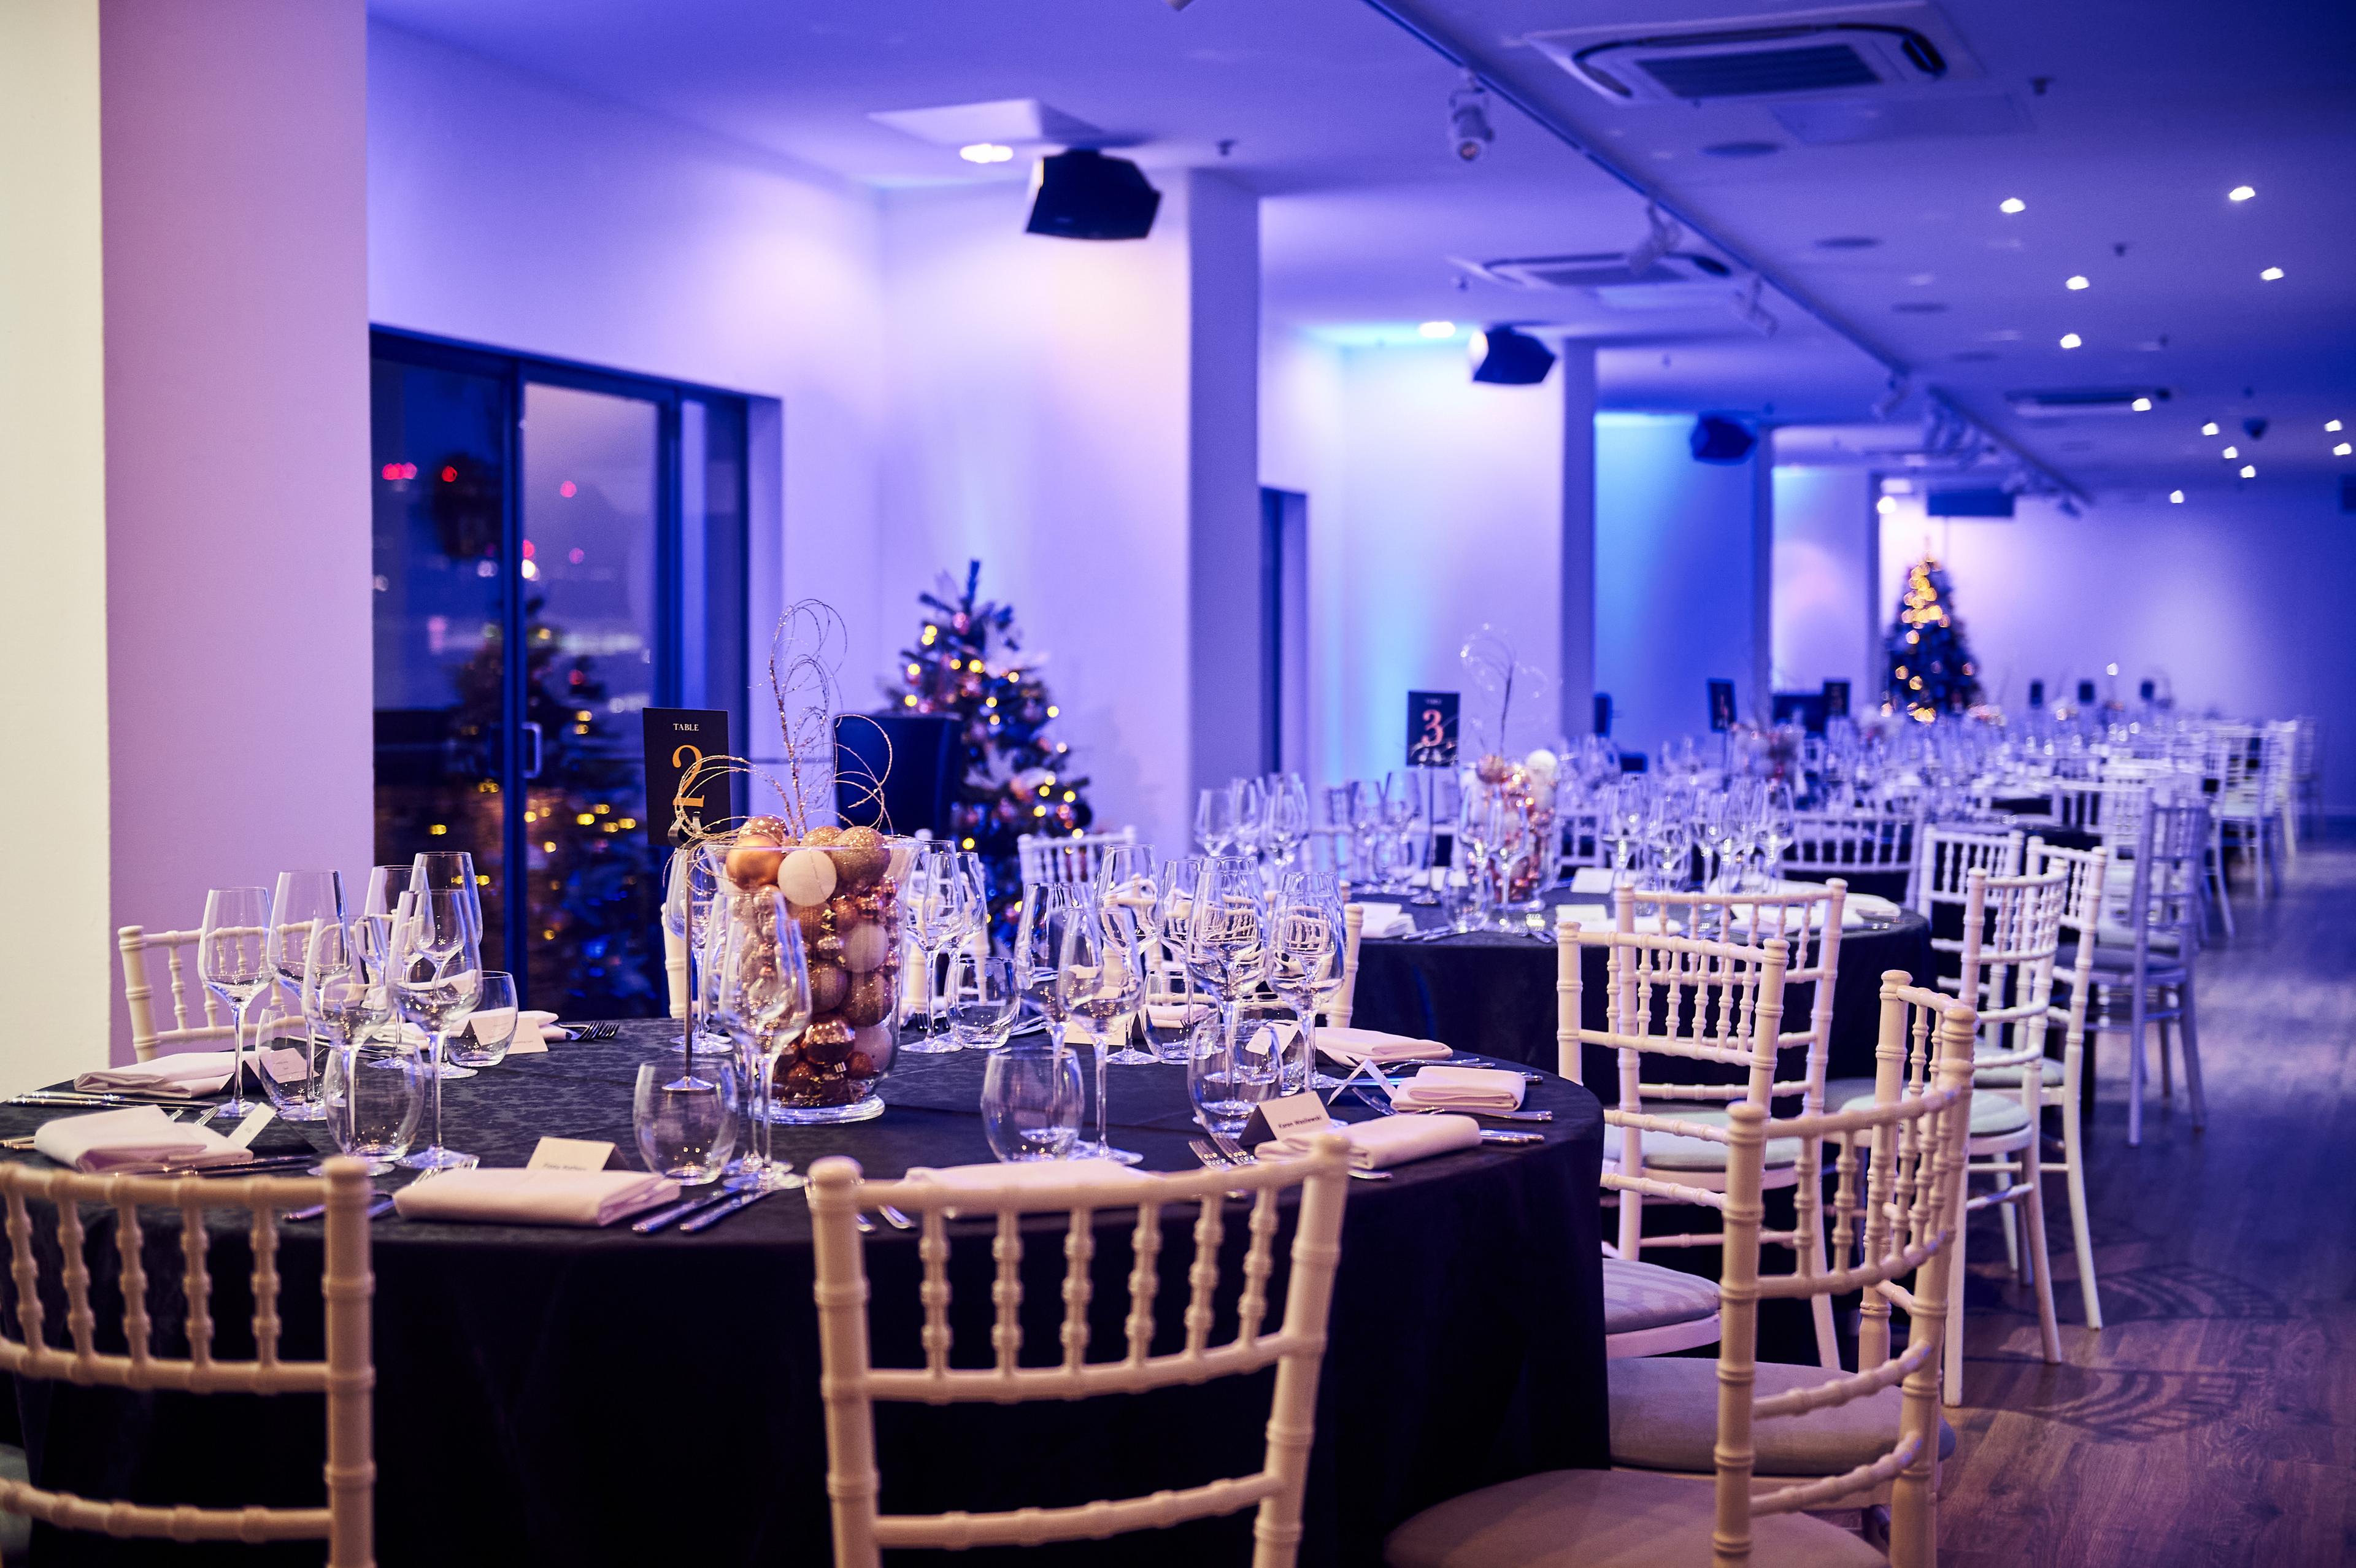 Exclusive Use Of Venue, OXO2 photo #1